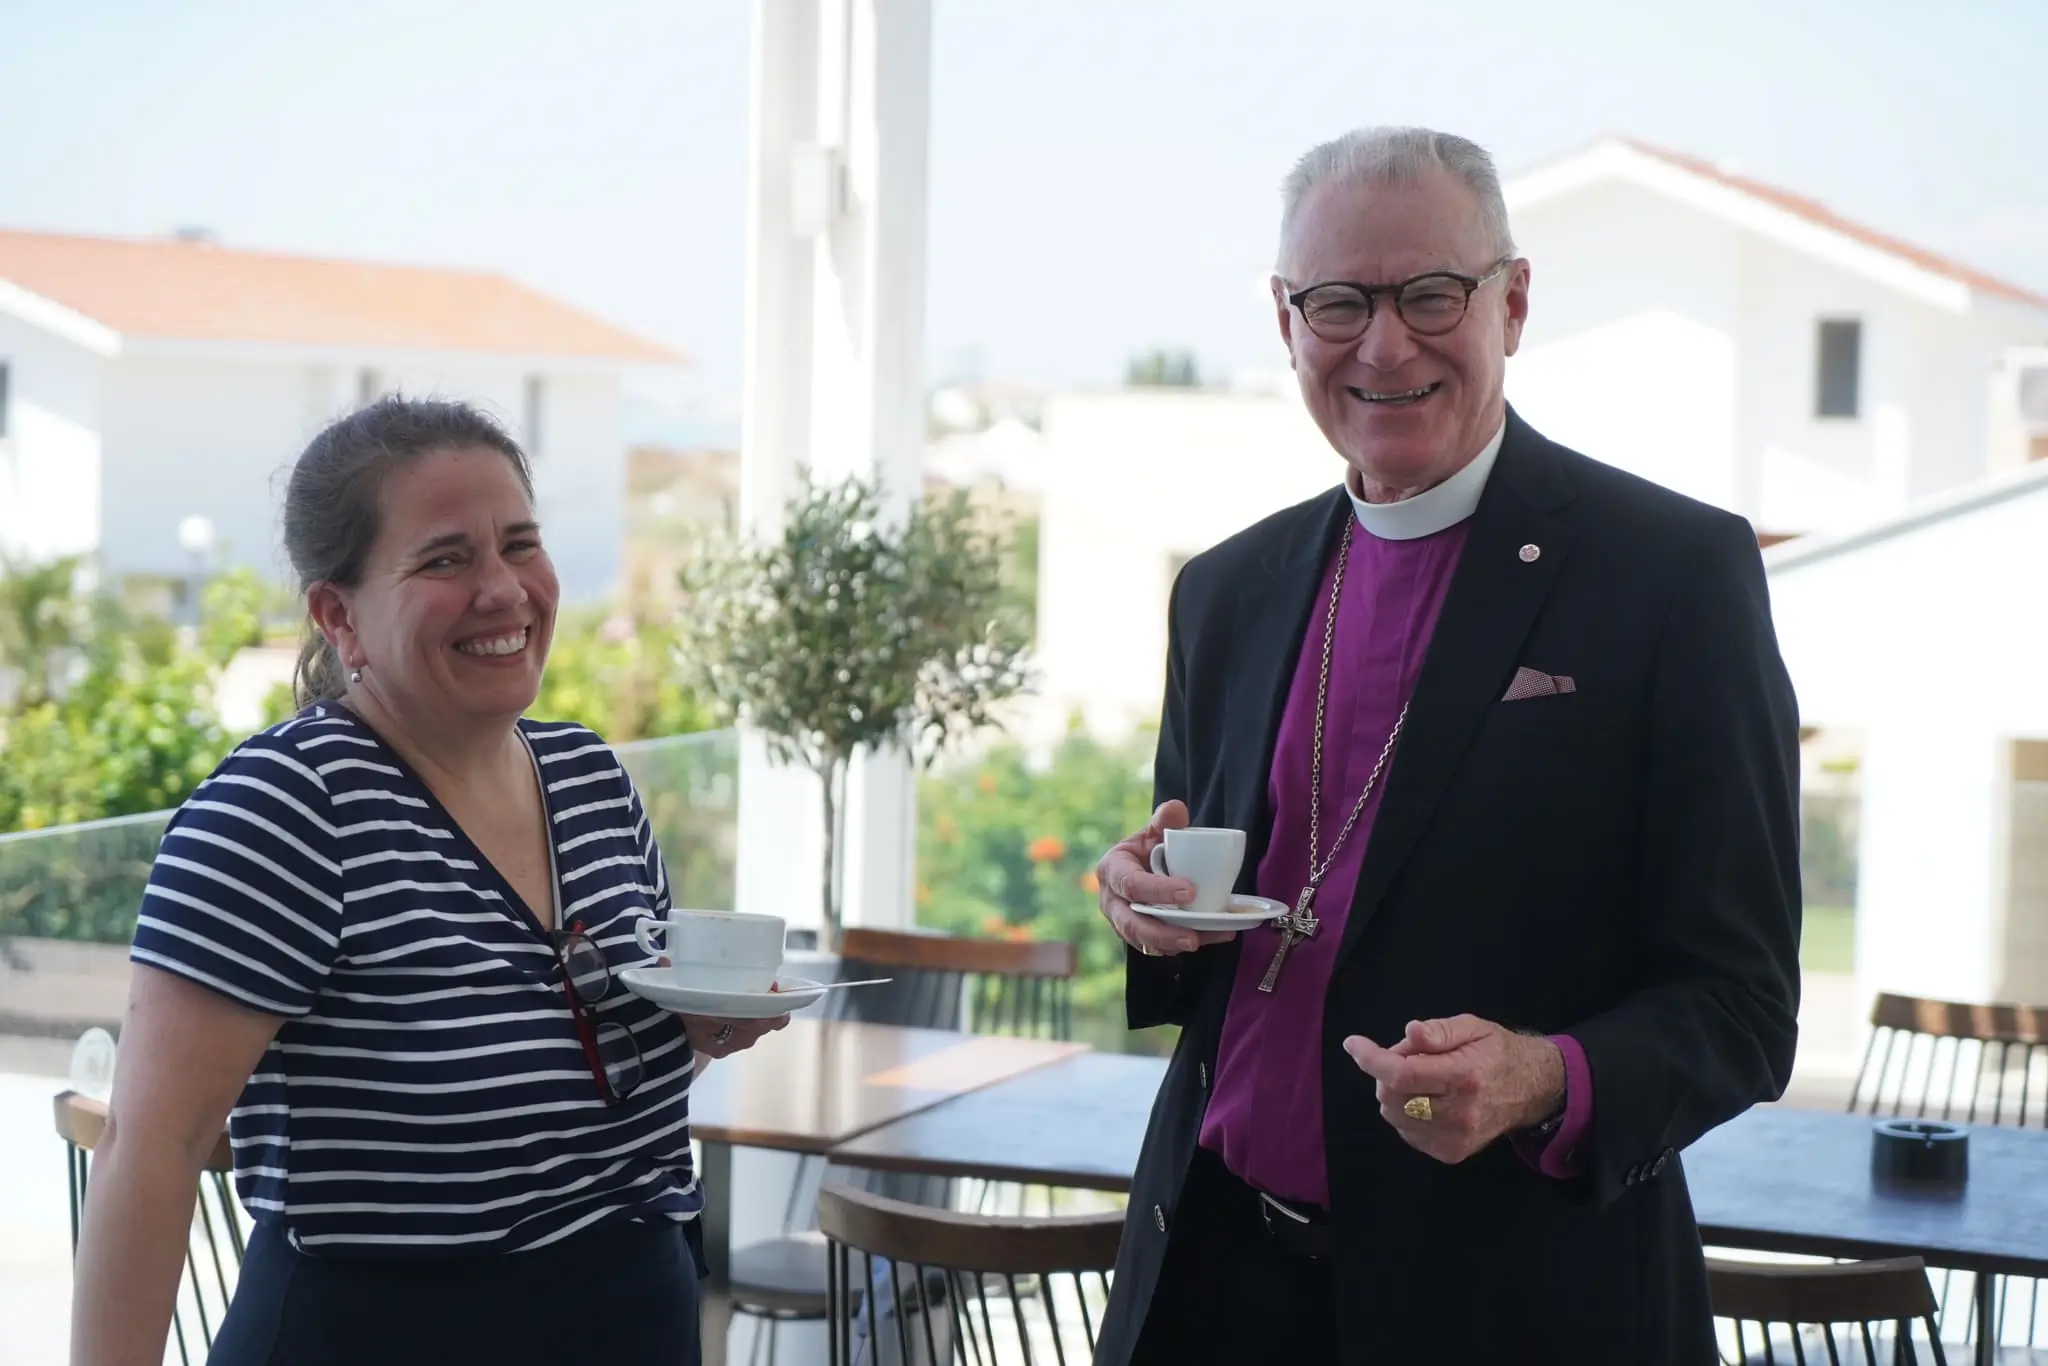 Dr Kristin Colberg, member of ARCIC III, and Archbishop Philip Freier, co-chair, at the dialogue meeting in Larnaca, Cyprus